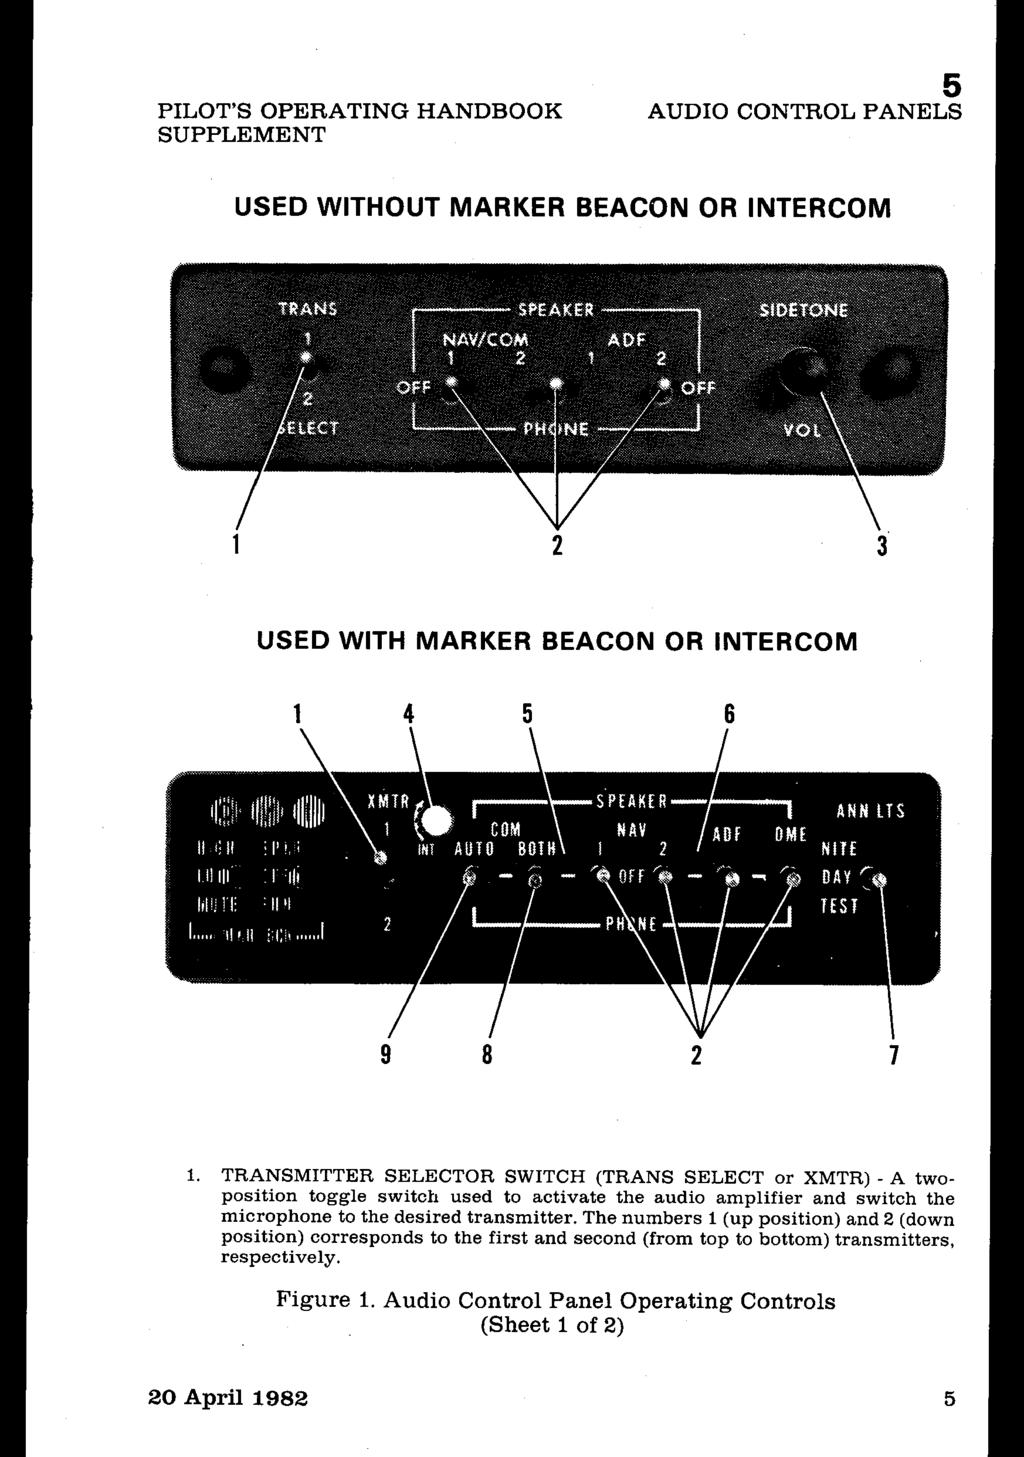 PILOT'S OPERATING HANDBOOK SUPPLEMENT 5 AUDIO CONTROL PANELS USED WITHOUT MARKER BEACON OR INTERCOM USED WITH MARKER BEACON OR INTERCOM 9 8 2 7 1.